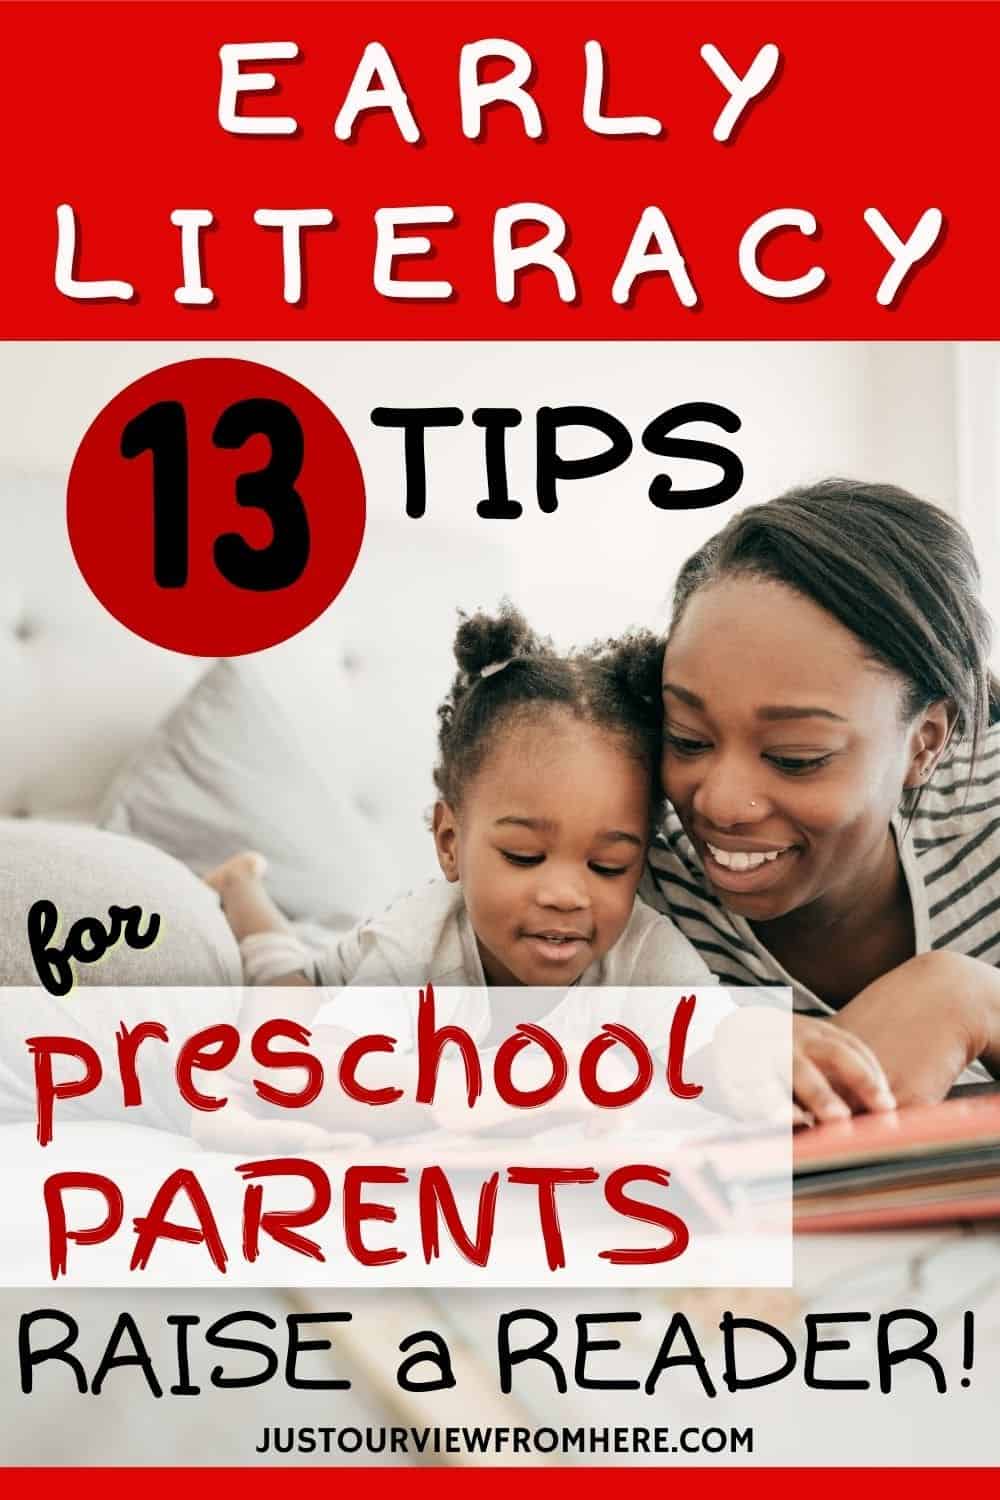 EARLY LITERACY TIPS FOR PRESCHOOL PARENTS